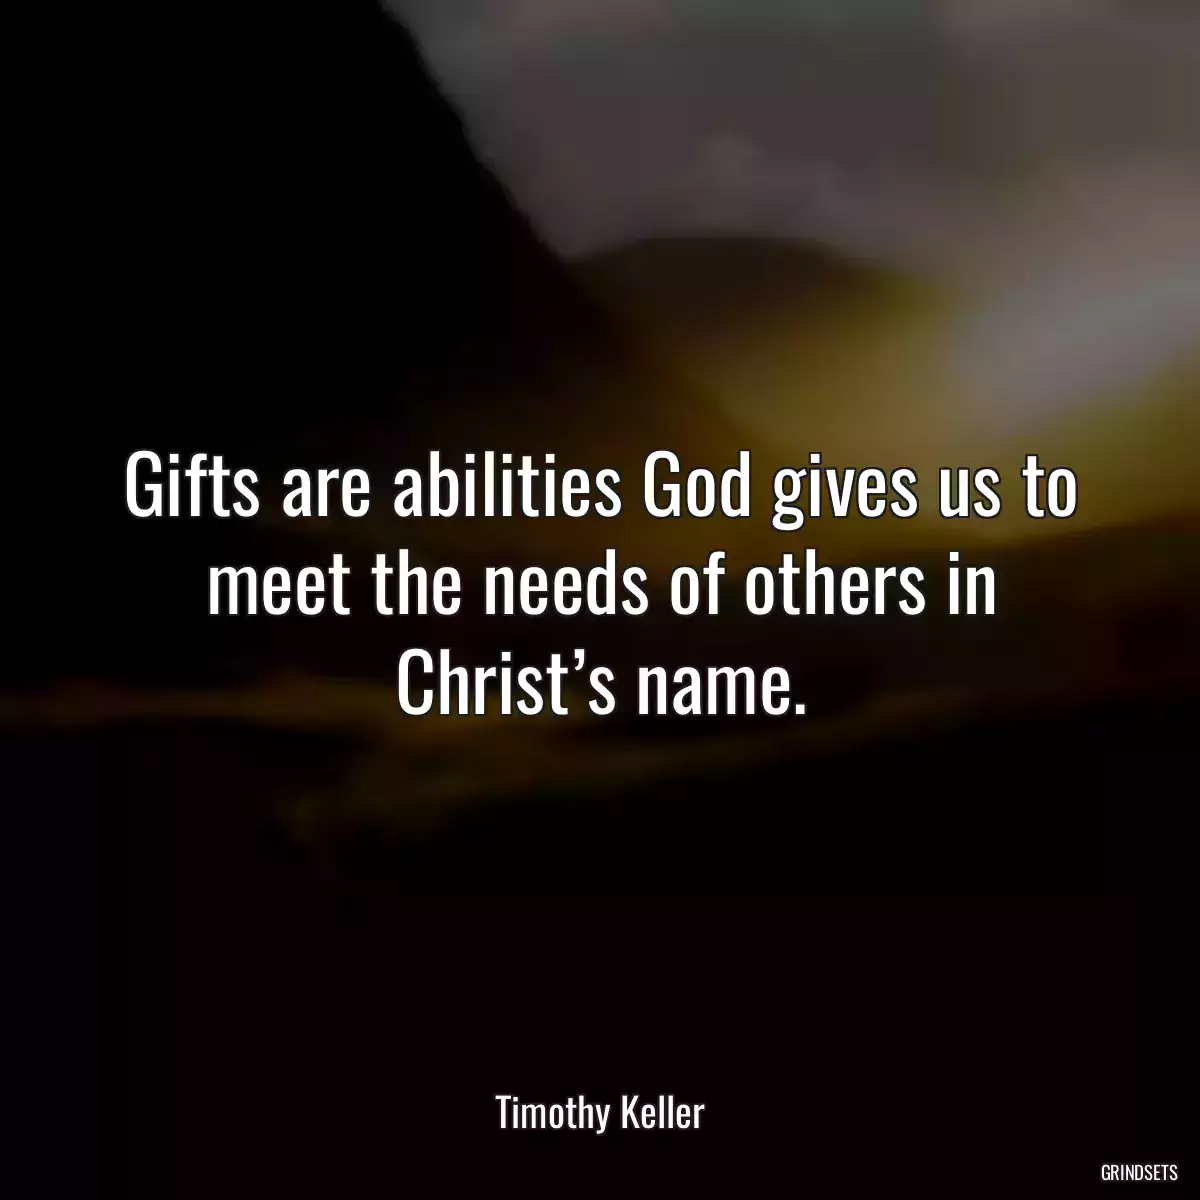 Gifts are abilities God gives us to meet the needs of others in Christ’s name.